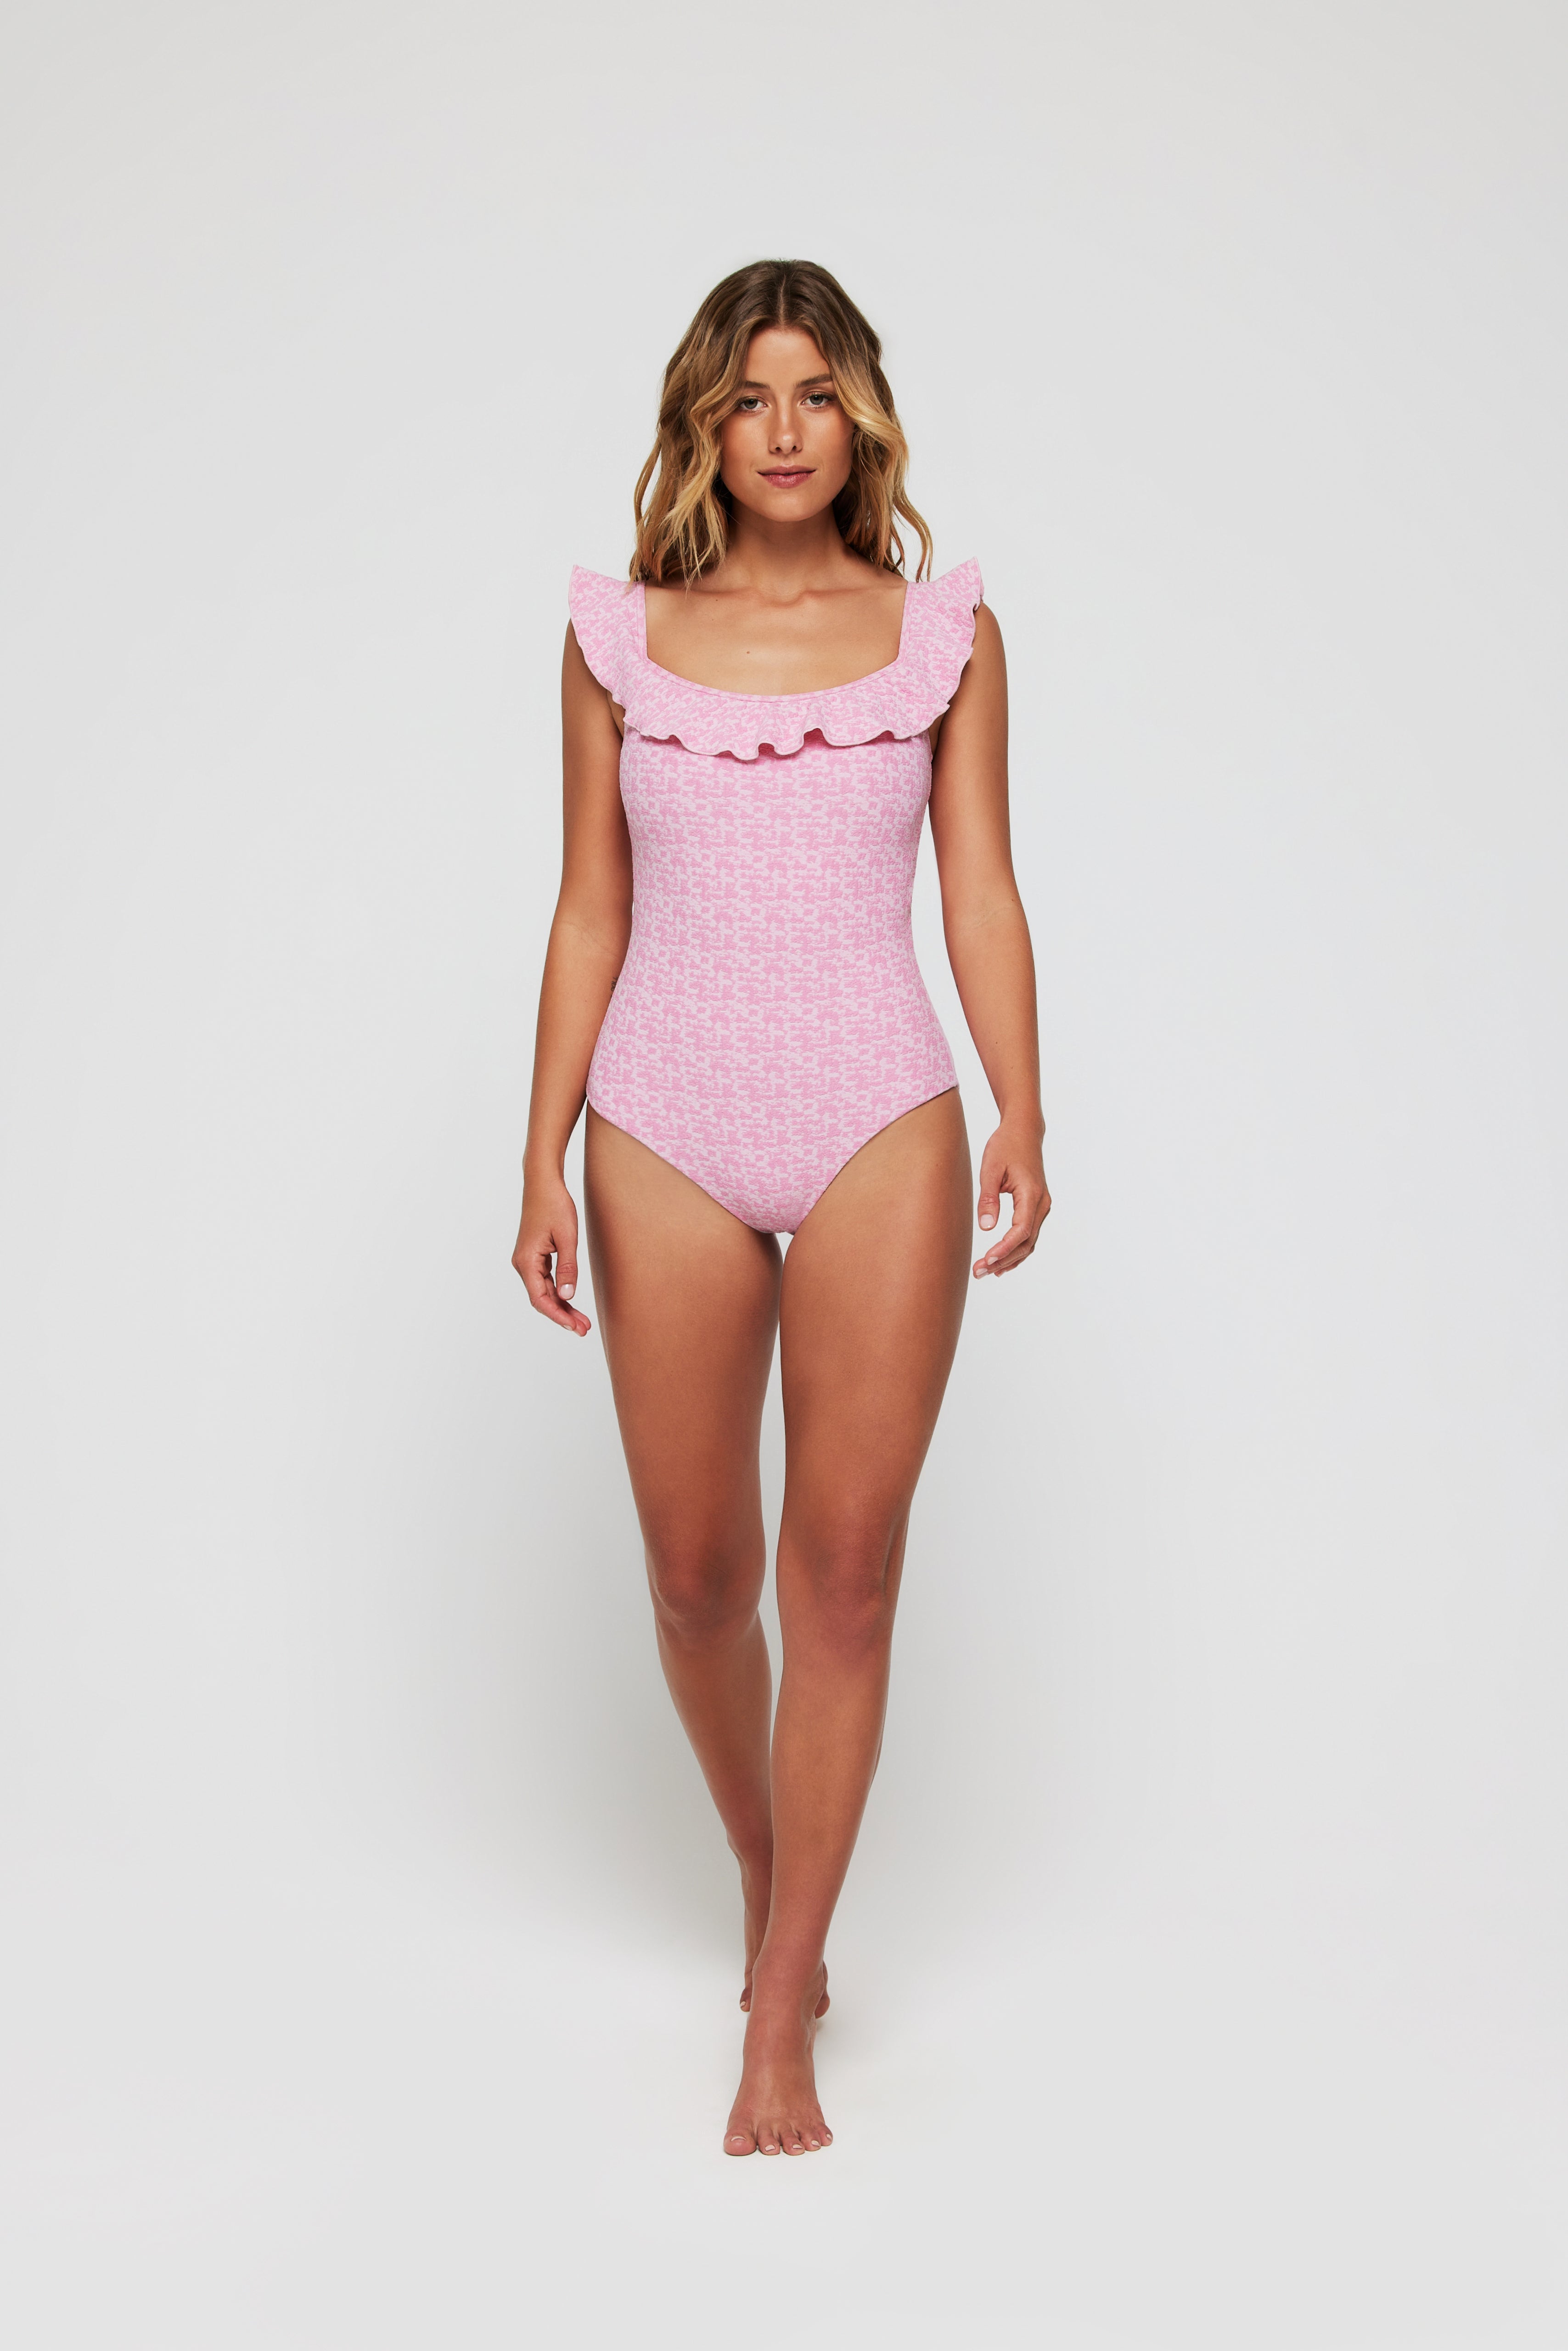 Toni One-Piece Swimsuit by Hermoza